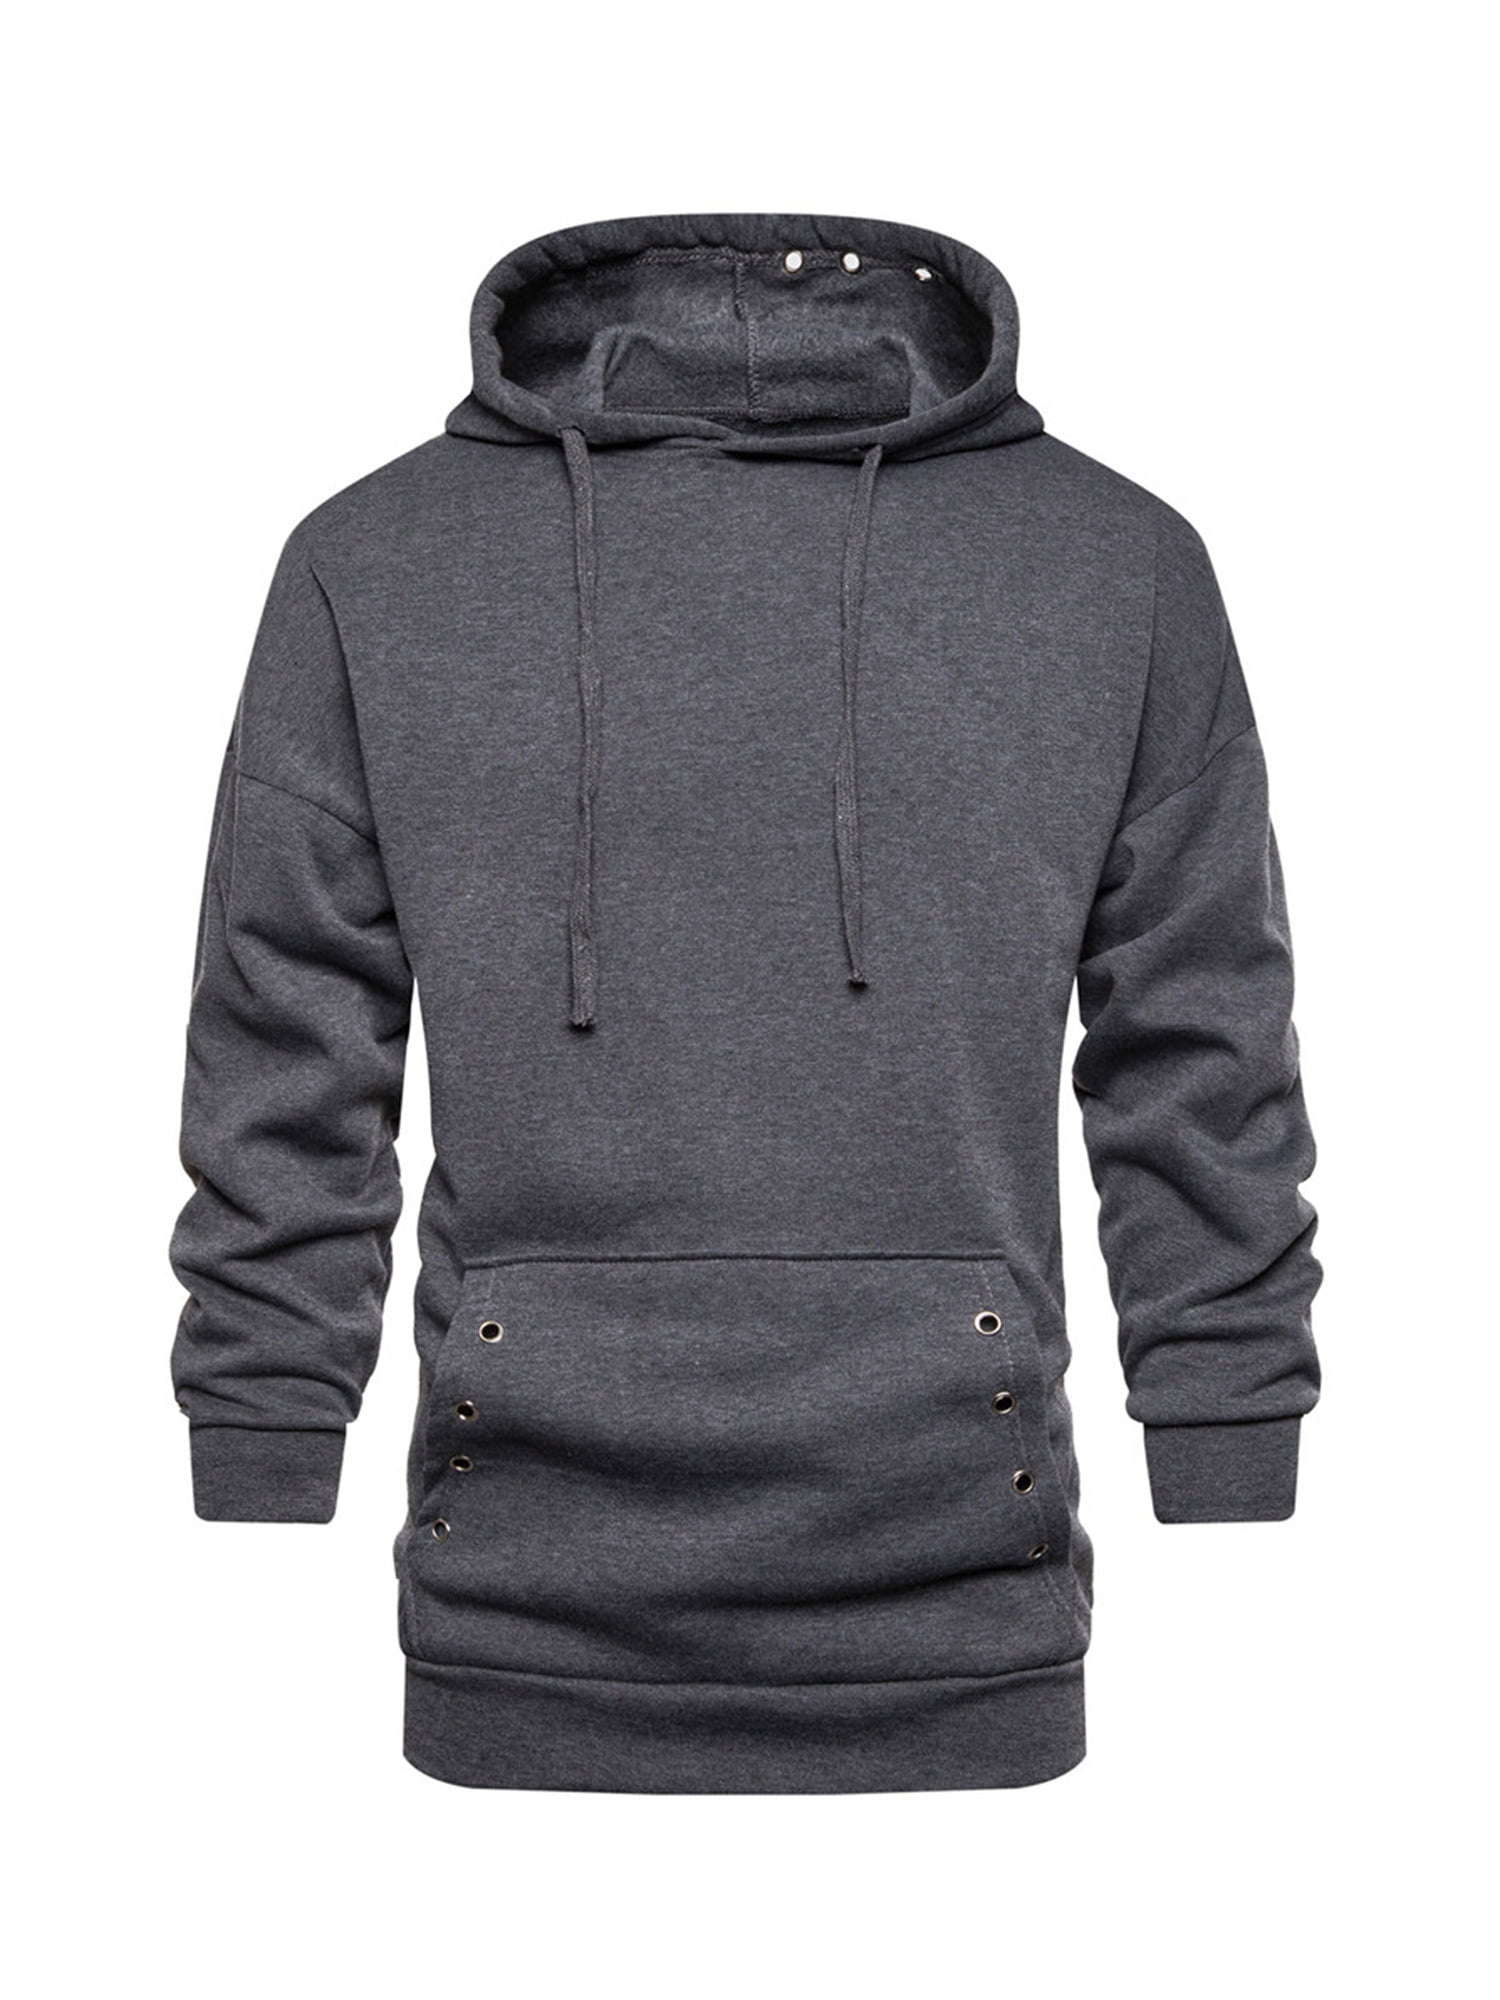 Mens Pullover Hoodie Sport Outwear with Pockets Warning Italian Watchr for Moving Hands